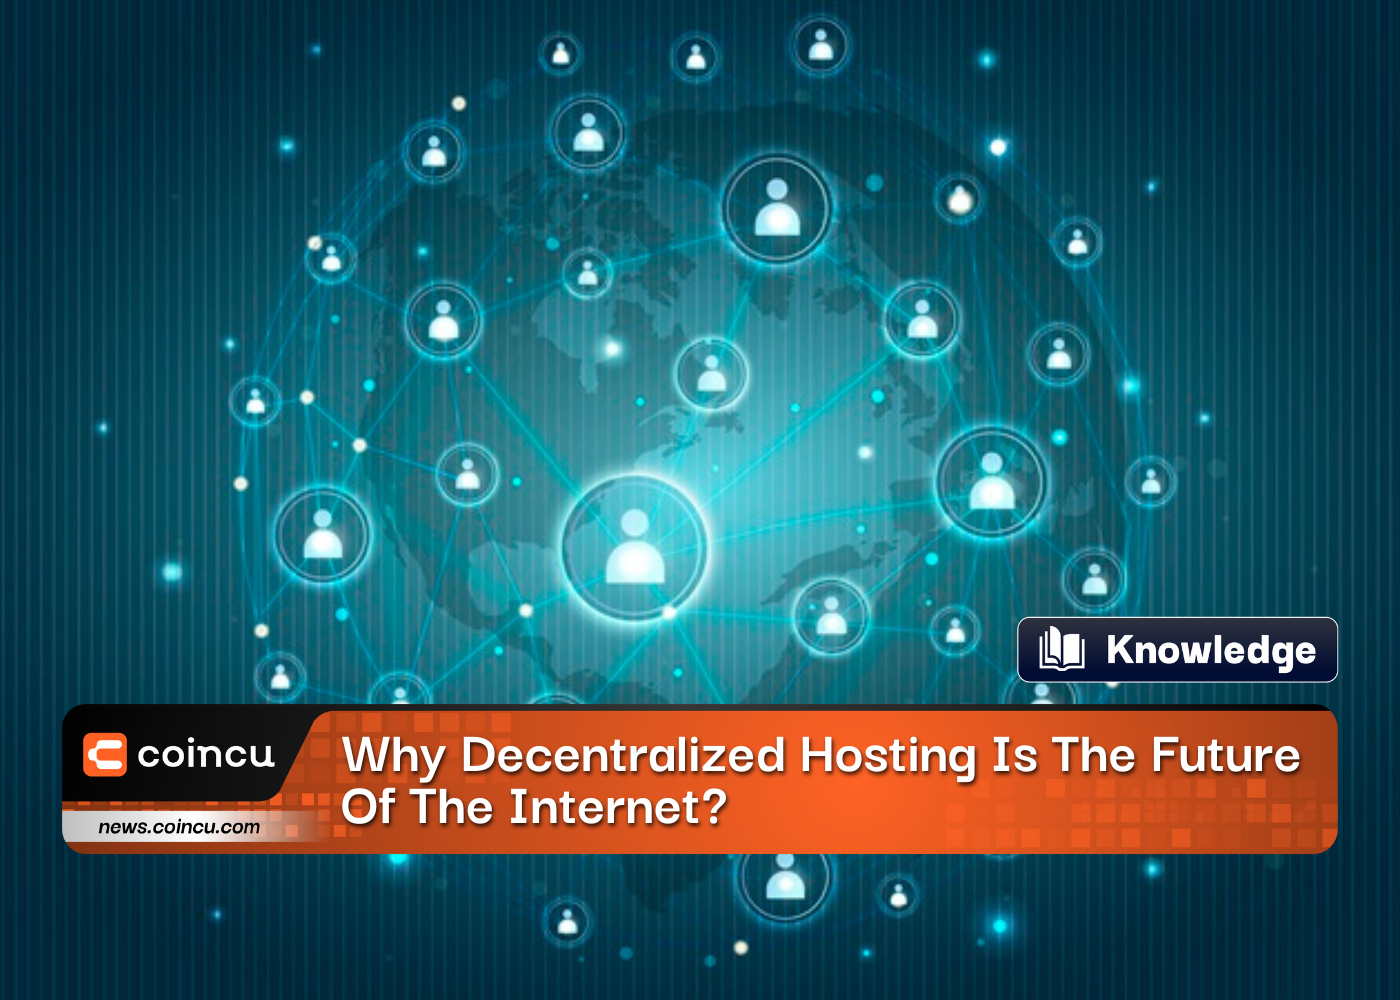 Why Decentralized Hosting Is The Future